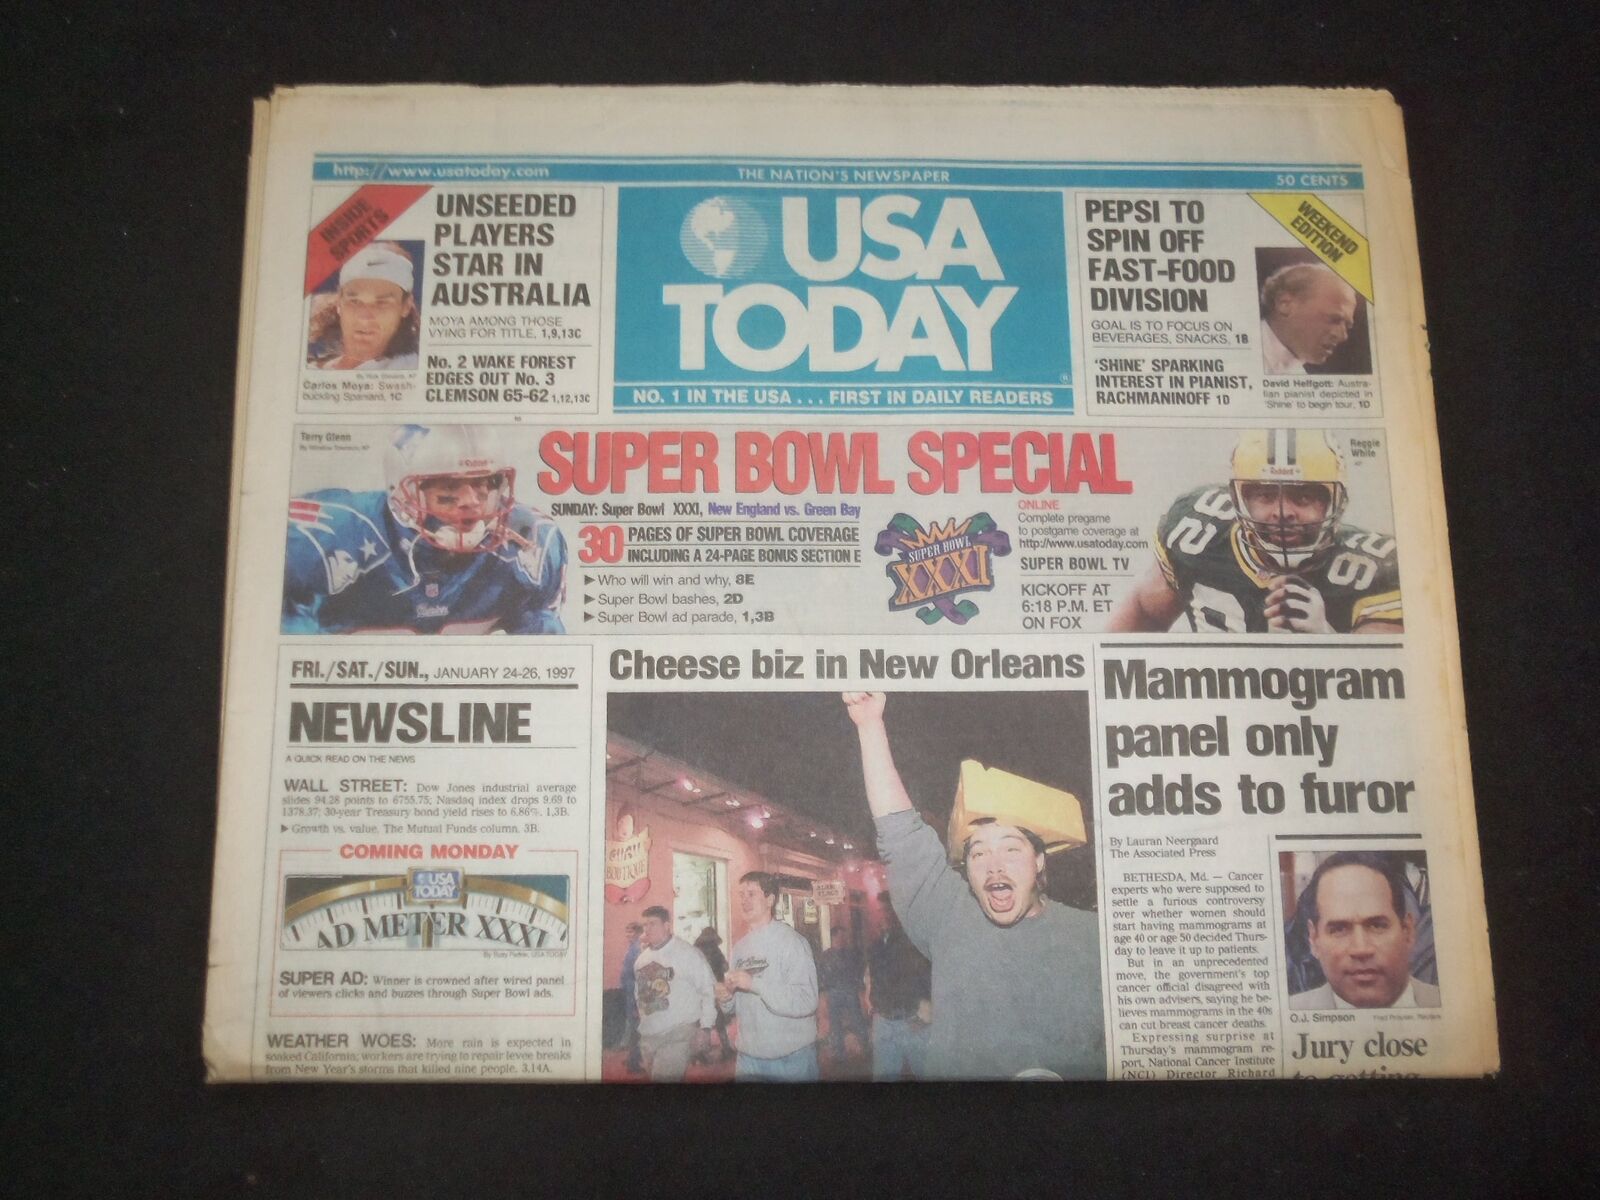 1997 JAN 24-26 USA TODAY NEWSPAPER - JURY CLOSE TO GETTING SIMPSON CASE -NP 7846